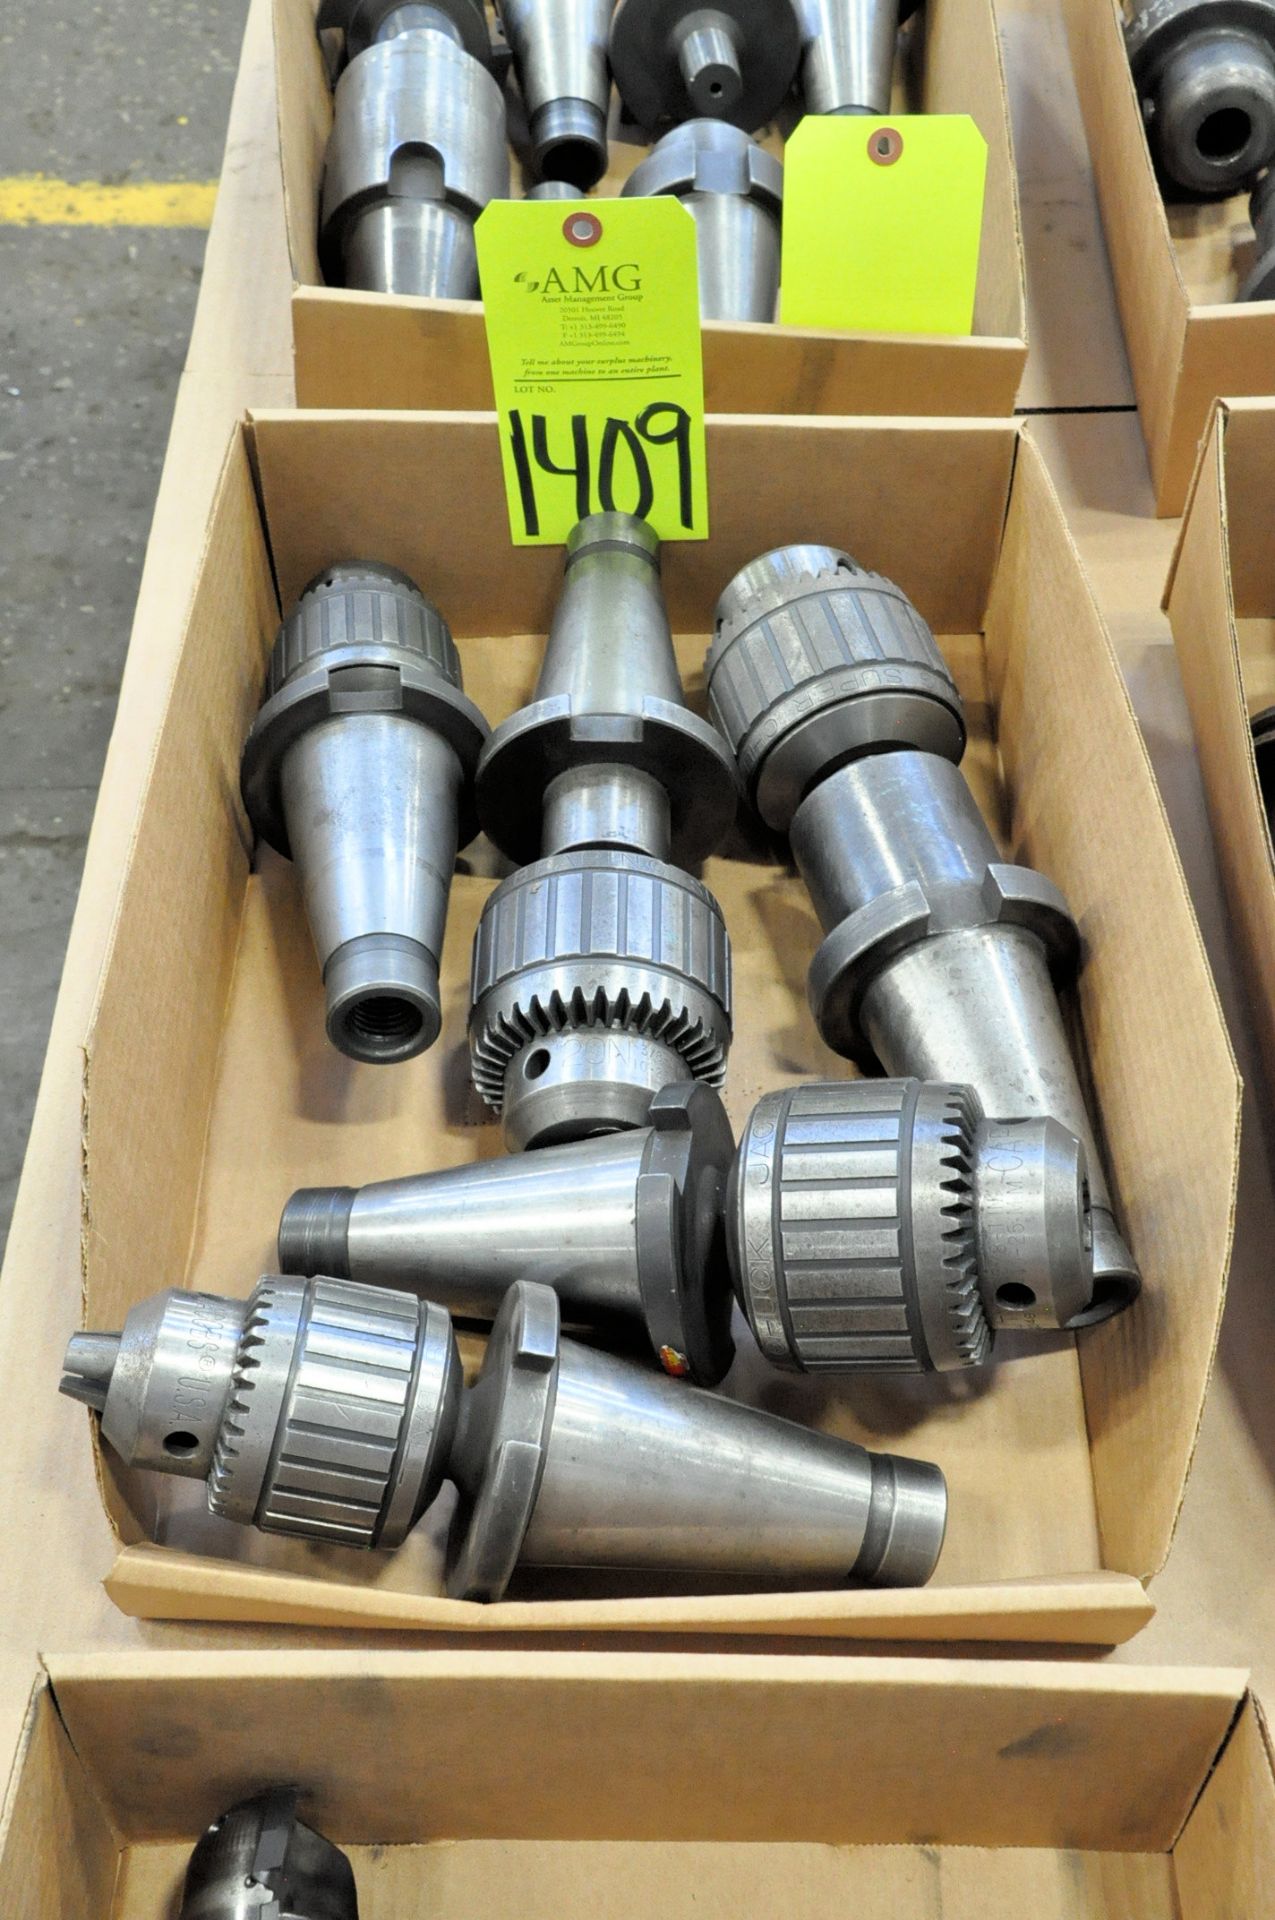 Lot-Lot-(5) 50-Taper Tool Holders with Drill Chucks, in (1) Box, (E-7), (Yellow Tag)